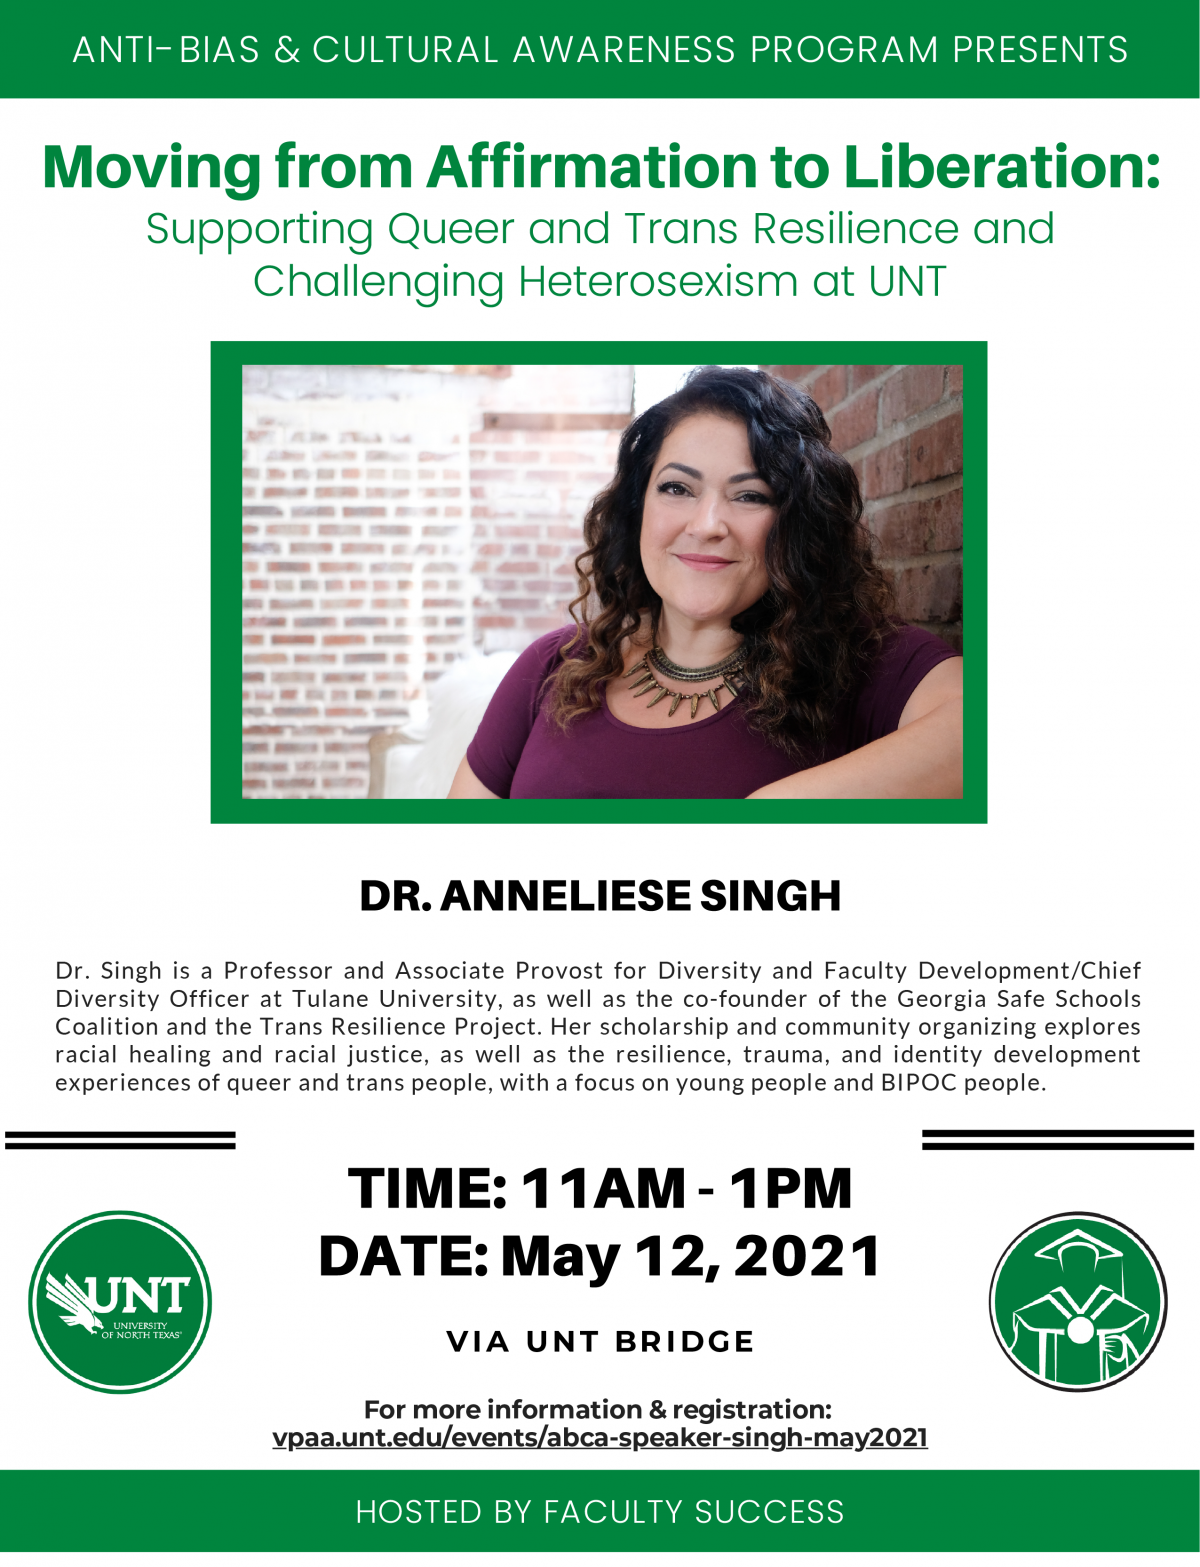 ANTI-BIAS & CULTURAL AWARENESS PROGRAM PRESENTS Moving from Affirmation to Liberation: Supporting Queer and Trans Resilience and Challenging Heterosexism at UNT DR. ANNELIESE SINGH  Dr. Singh is a Professor and Associate Provost for Diversity and Faculty Development/Chief Diversity Officer at Tulane University, as well as the co-founder of the Georgia Safe Schools Coalition and the Trans Resilience Project. Her scholarship and community organizing explores racial healing and racial justice, as well as the resilience, trauma, and identity development experiences of queer and trans people, with a focus on young people and BIPOC people. TIME: 11AM - 1PM DATE: May 12, 2021 VIA UNT BRIDGE For more information & registration: vpaa.unt.edu/events/abca-speaker-singh-may2021 HOSTED BY FACULTY SUCCESS